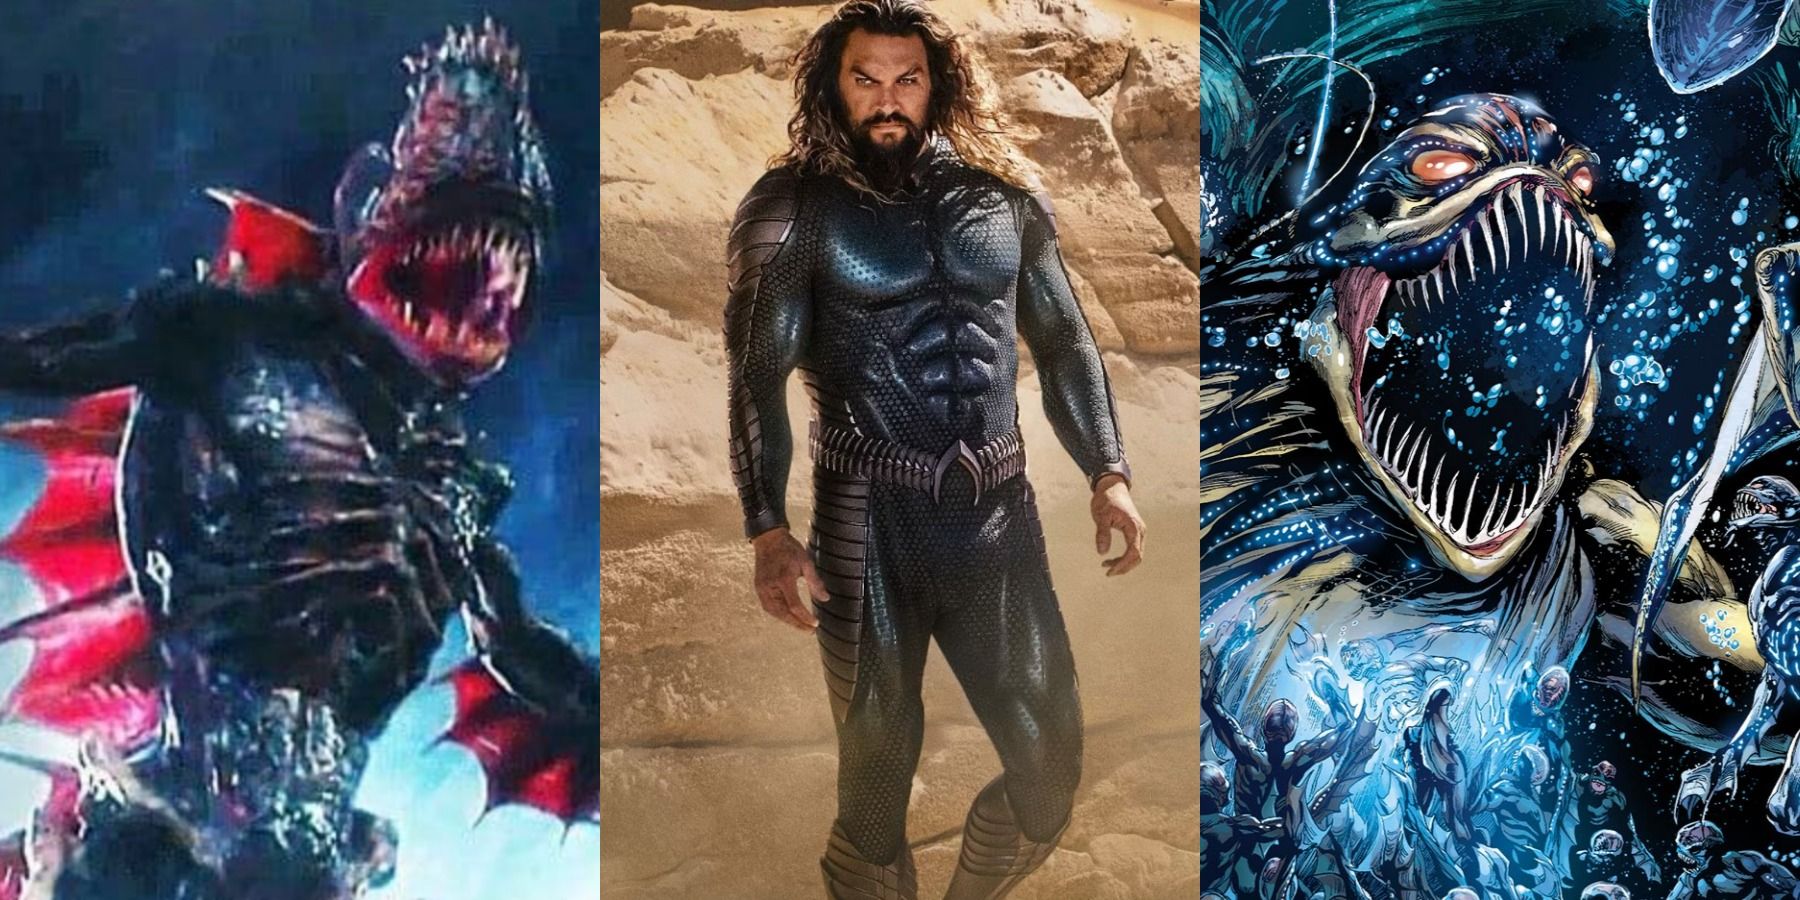 A split image depicts the Trench in the DCEU, Jason Momoa as Aquaman for Aquaman 2, and the Trench in DC Comics